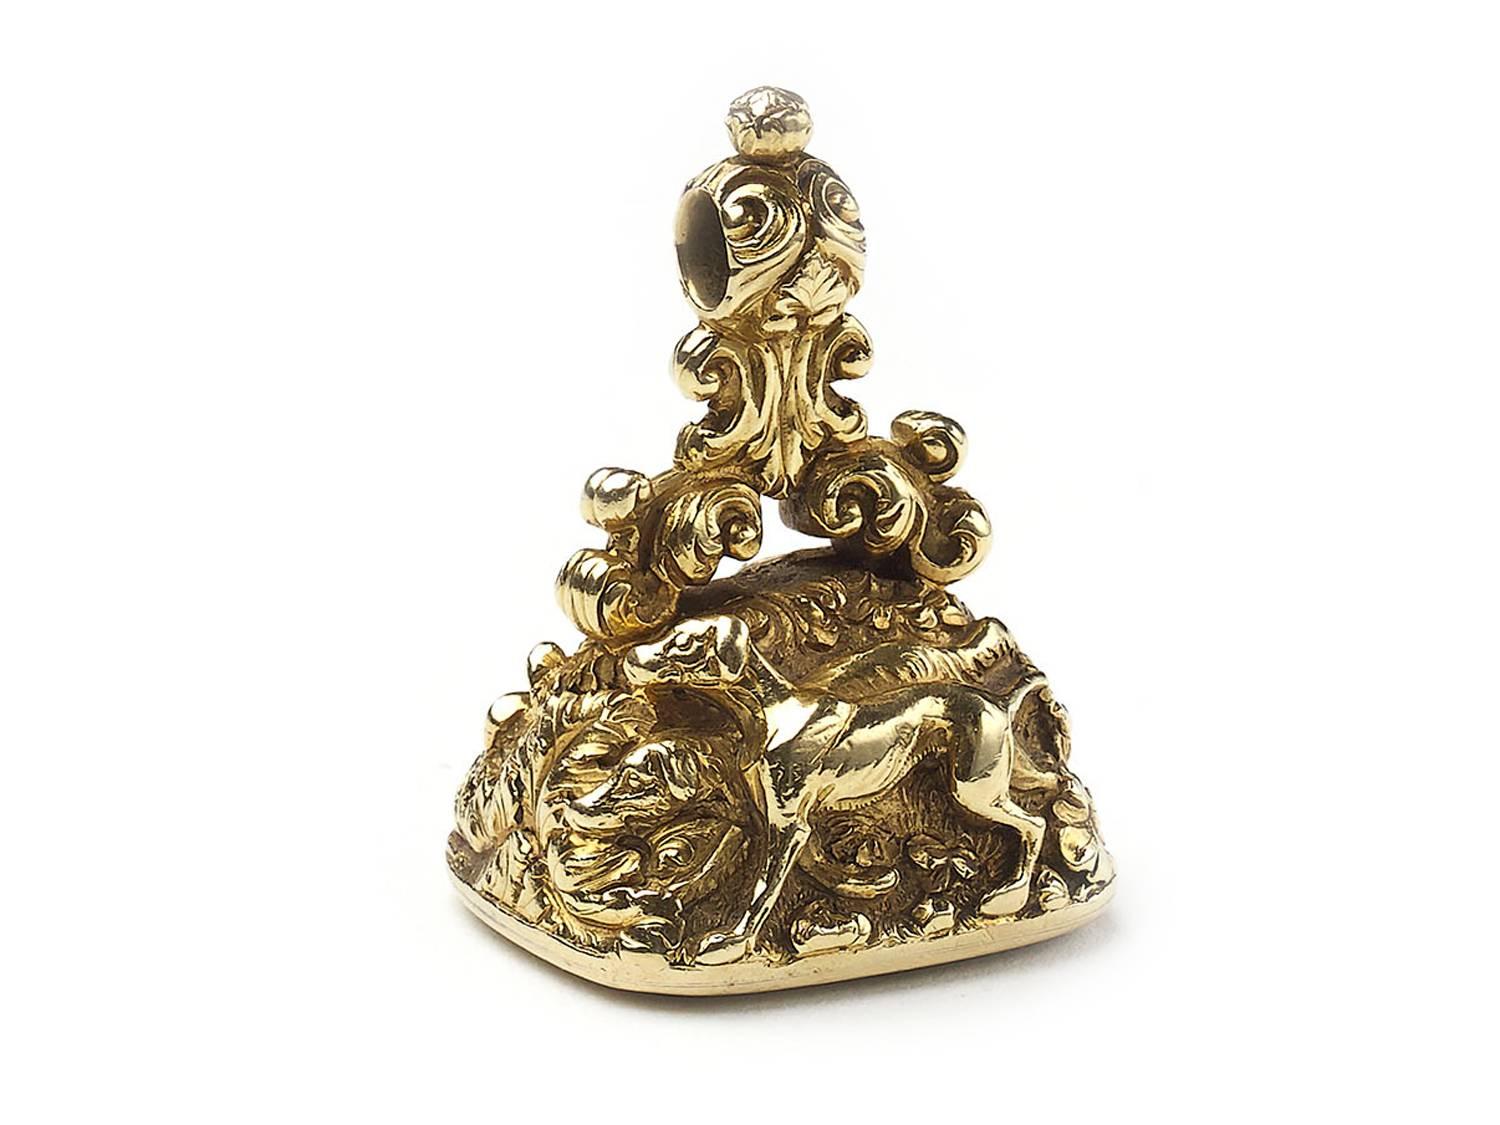 A 19th Century hunting fob seal, the carved foliate mount depicting two hound dogs stalking pheasants, mounted in 15ct yellow gold. Length approximately 4.2 cm